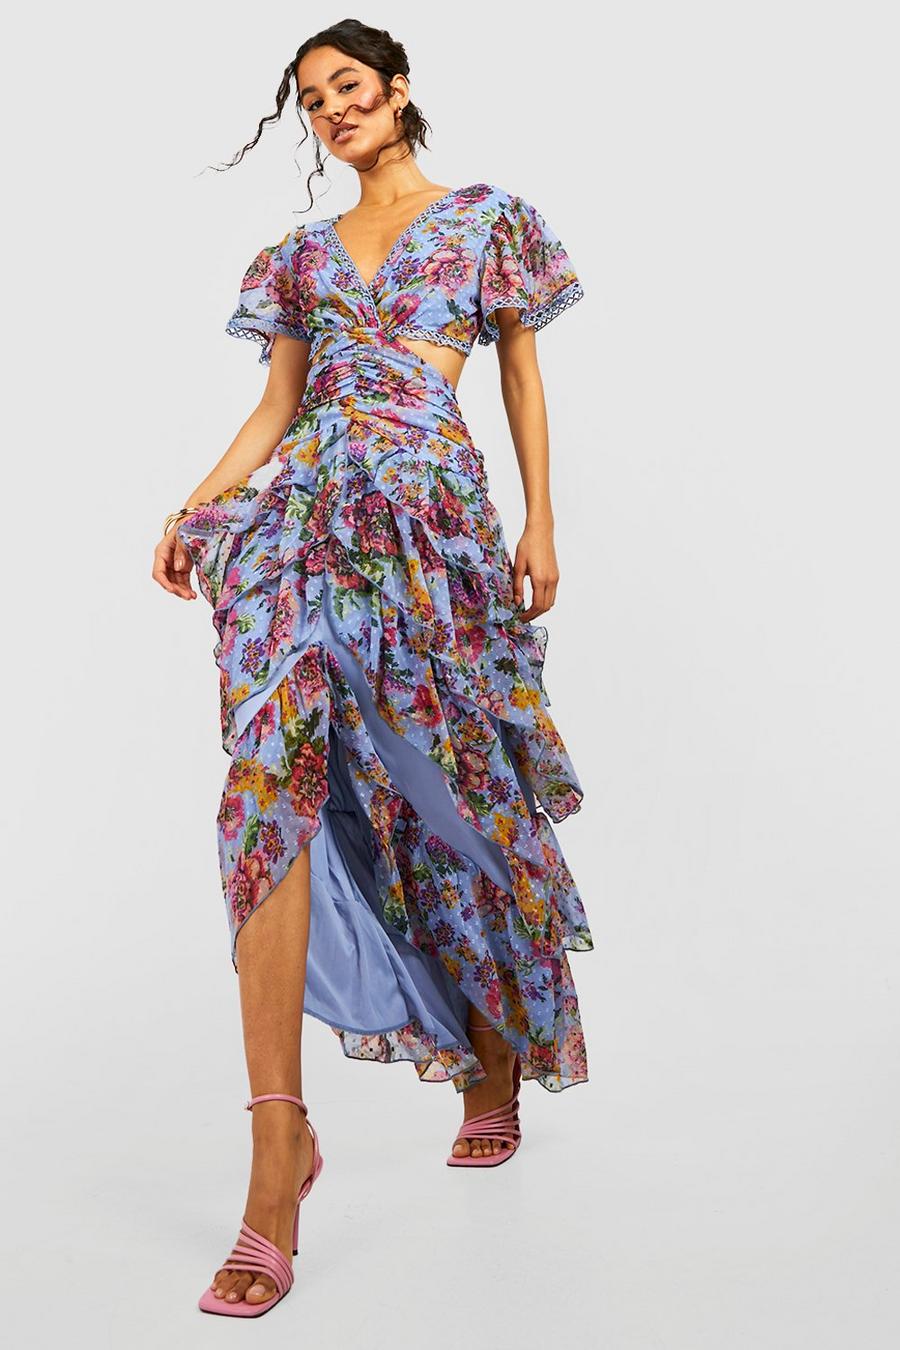 Get the dress for $129 at blnts.com - Wheretoget  Cutout maxi dress,  Womens maxi dresses, Blouse outfit